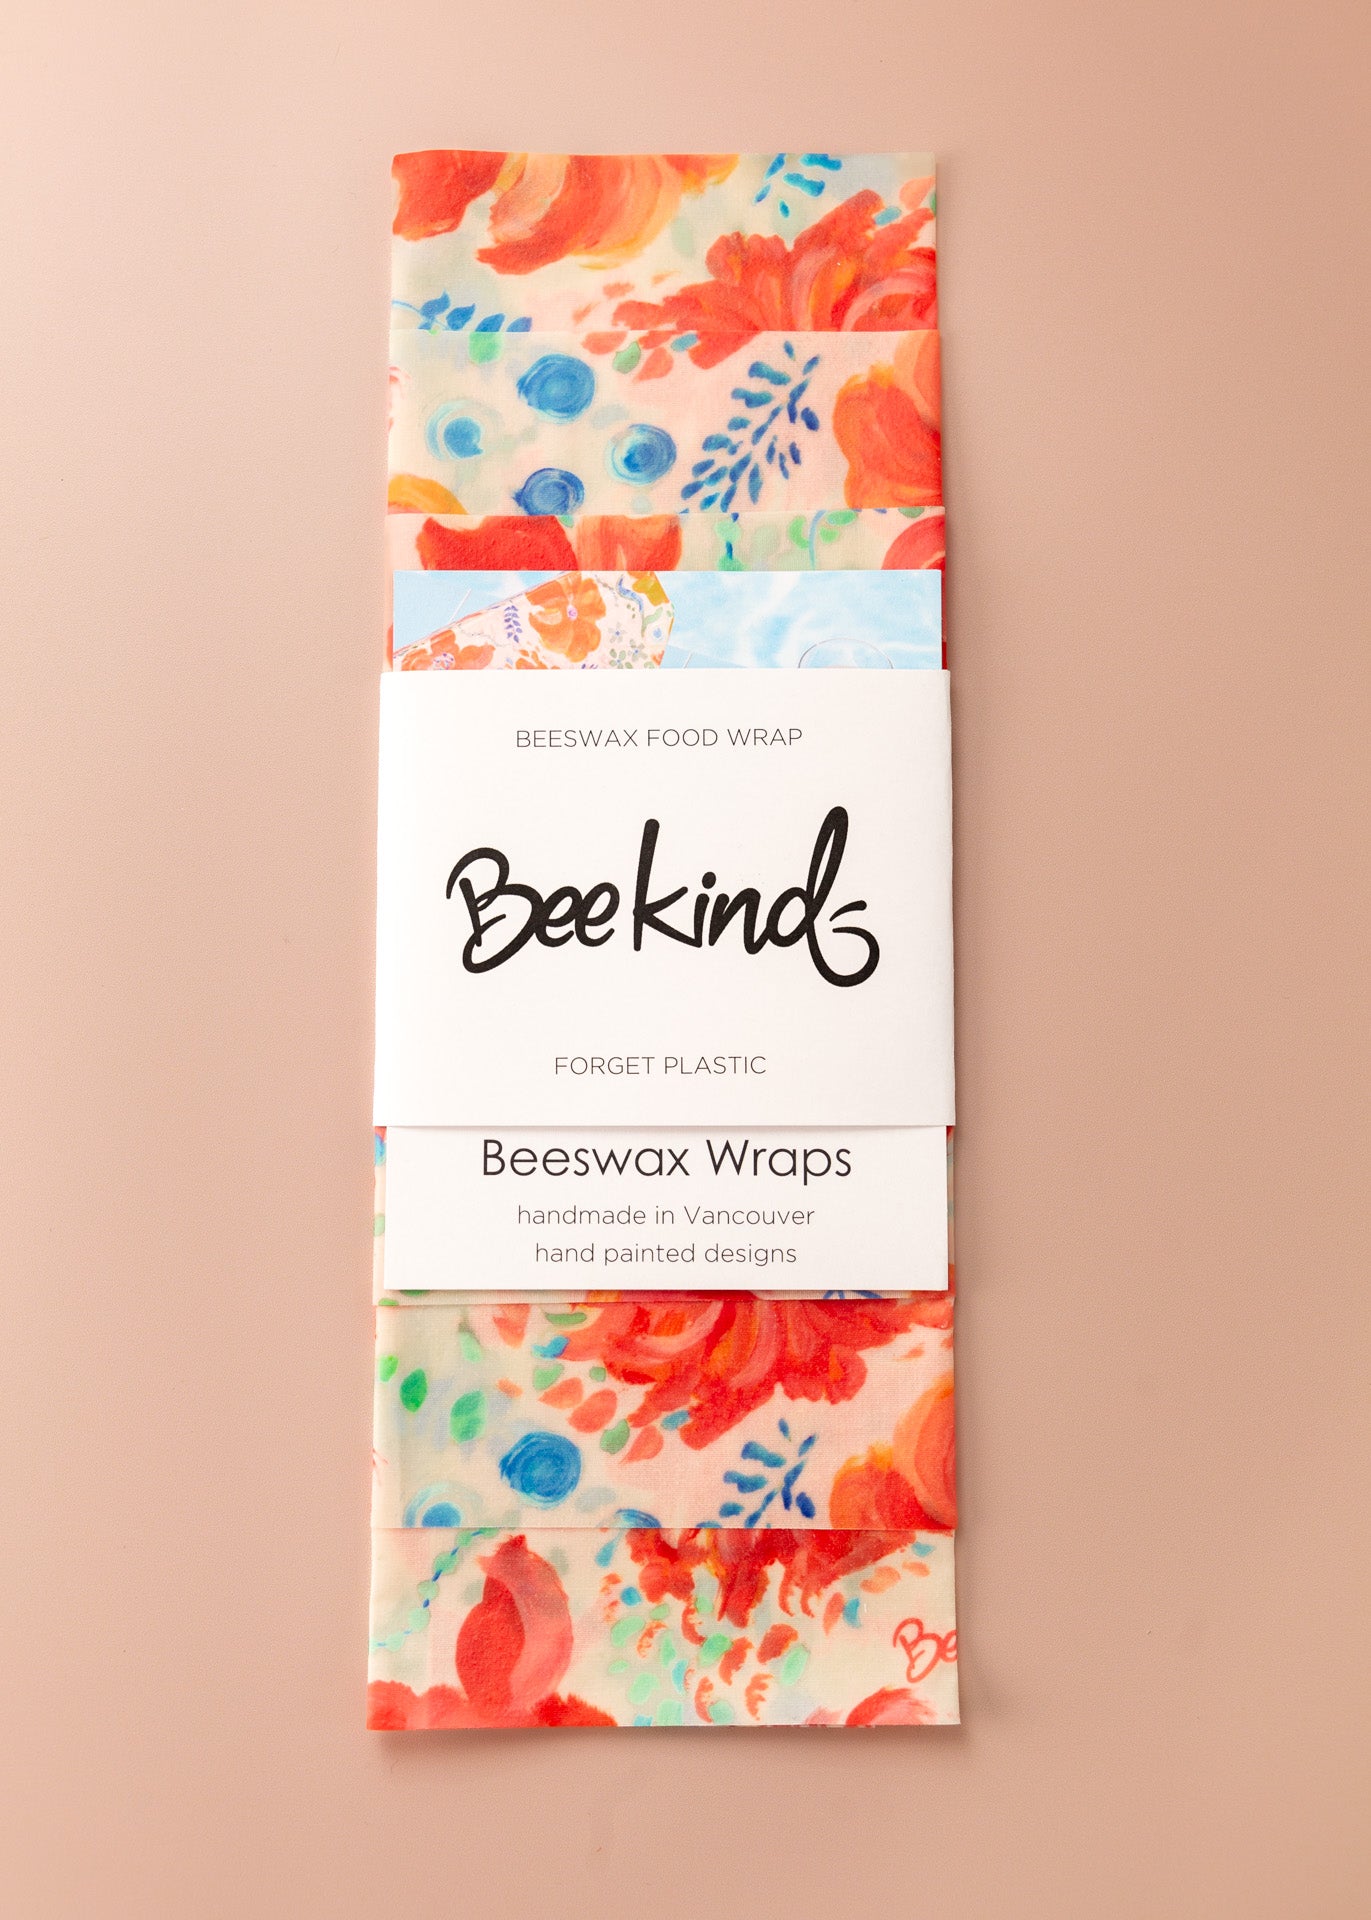 Set of 3 beeswax wraps folding with a white label saying "beekind" on a pink flatlay